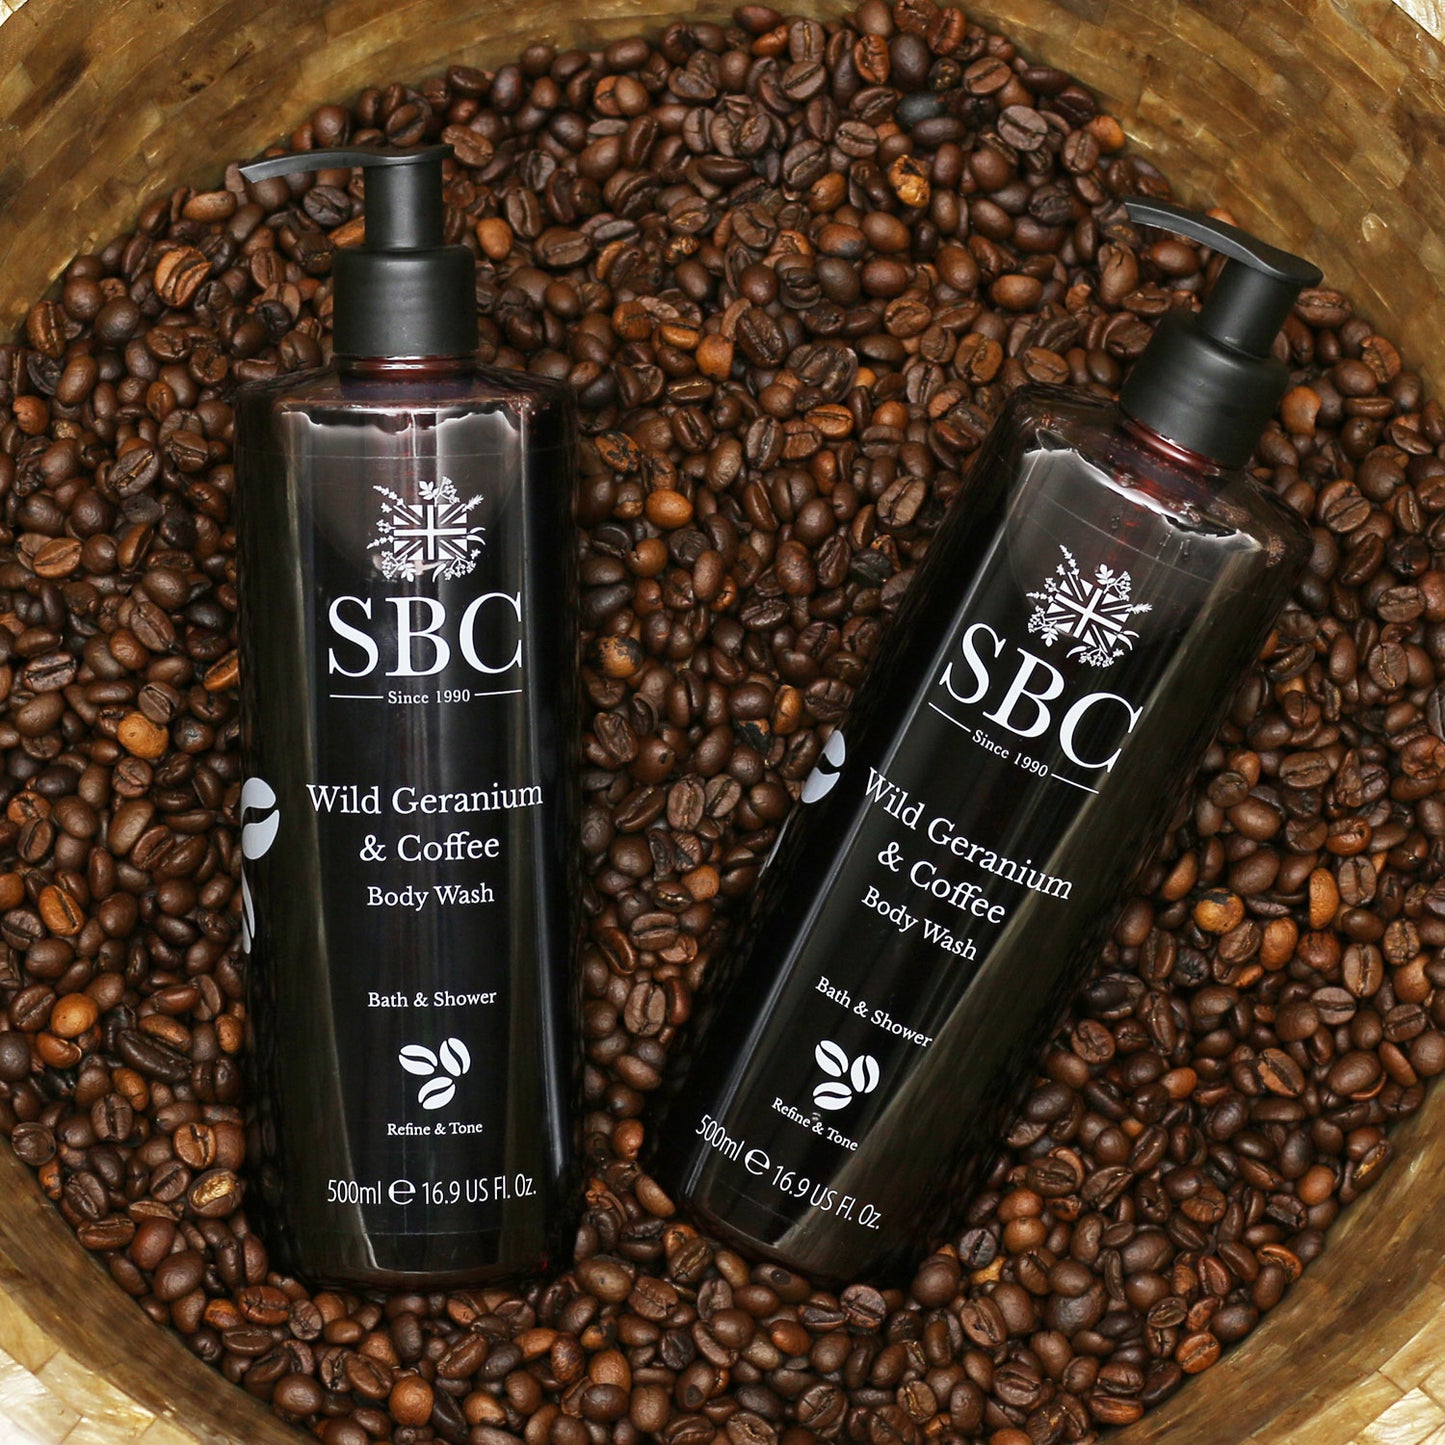 Two Wild Geranium & Coffee Body Wash in a bowl of coffee beans 